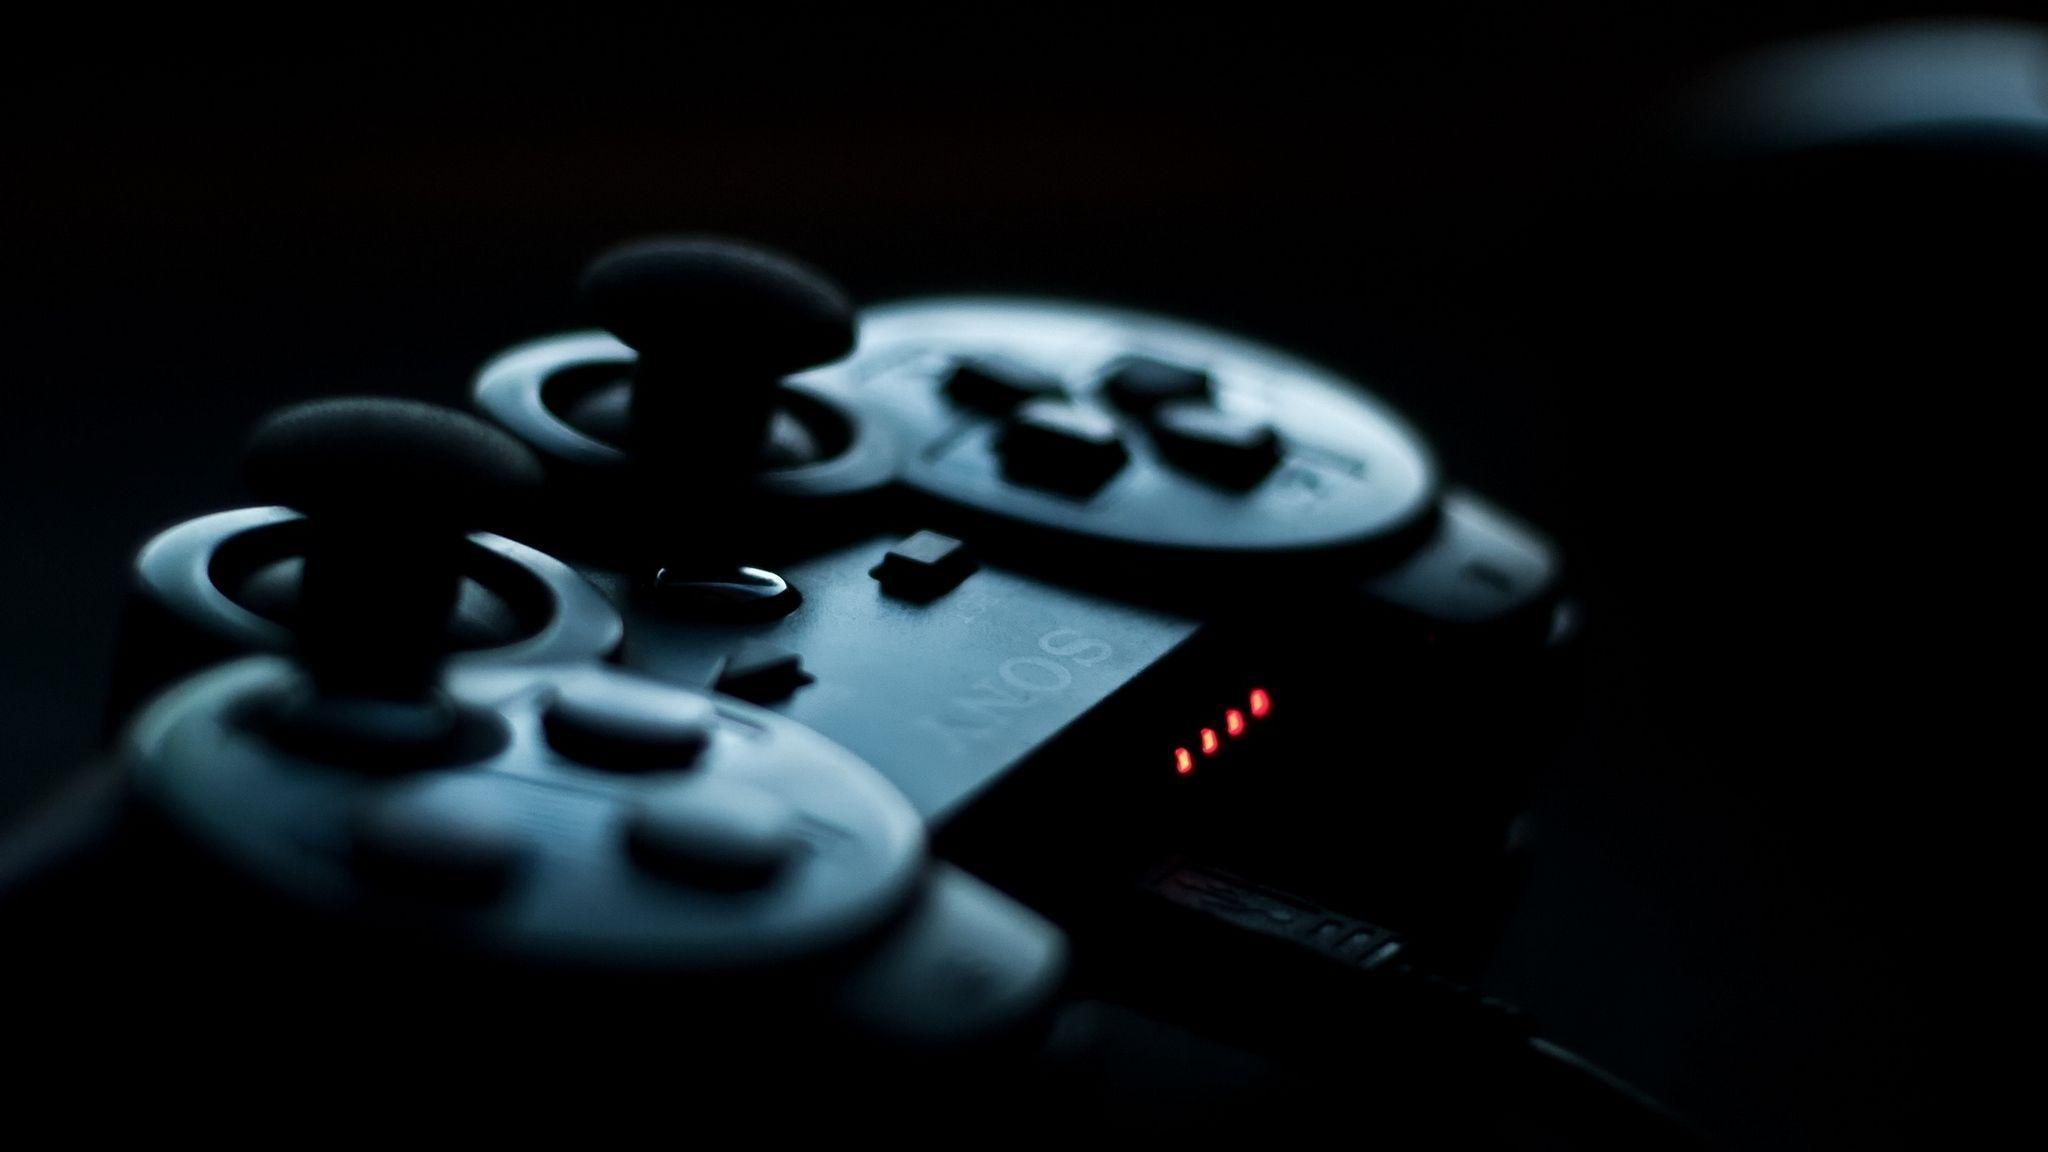 Download wallpaper 2048x1152 joystick, sony, playstation, game